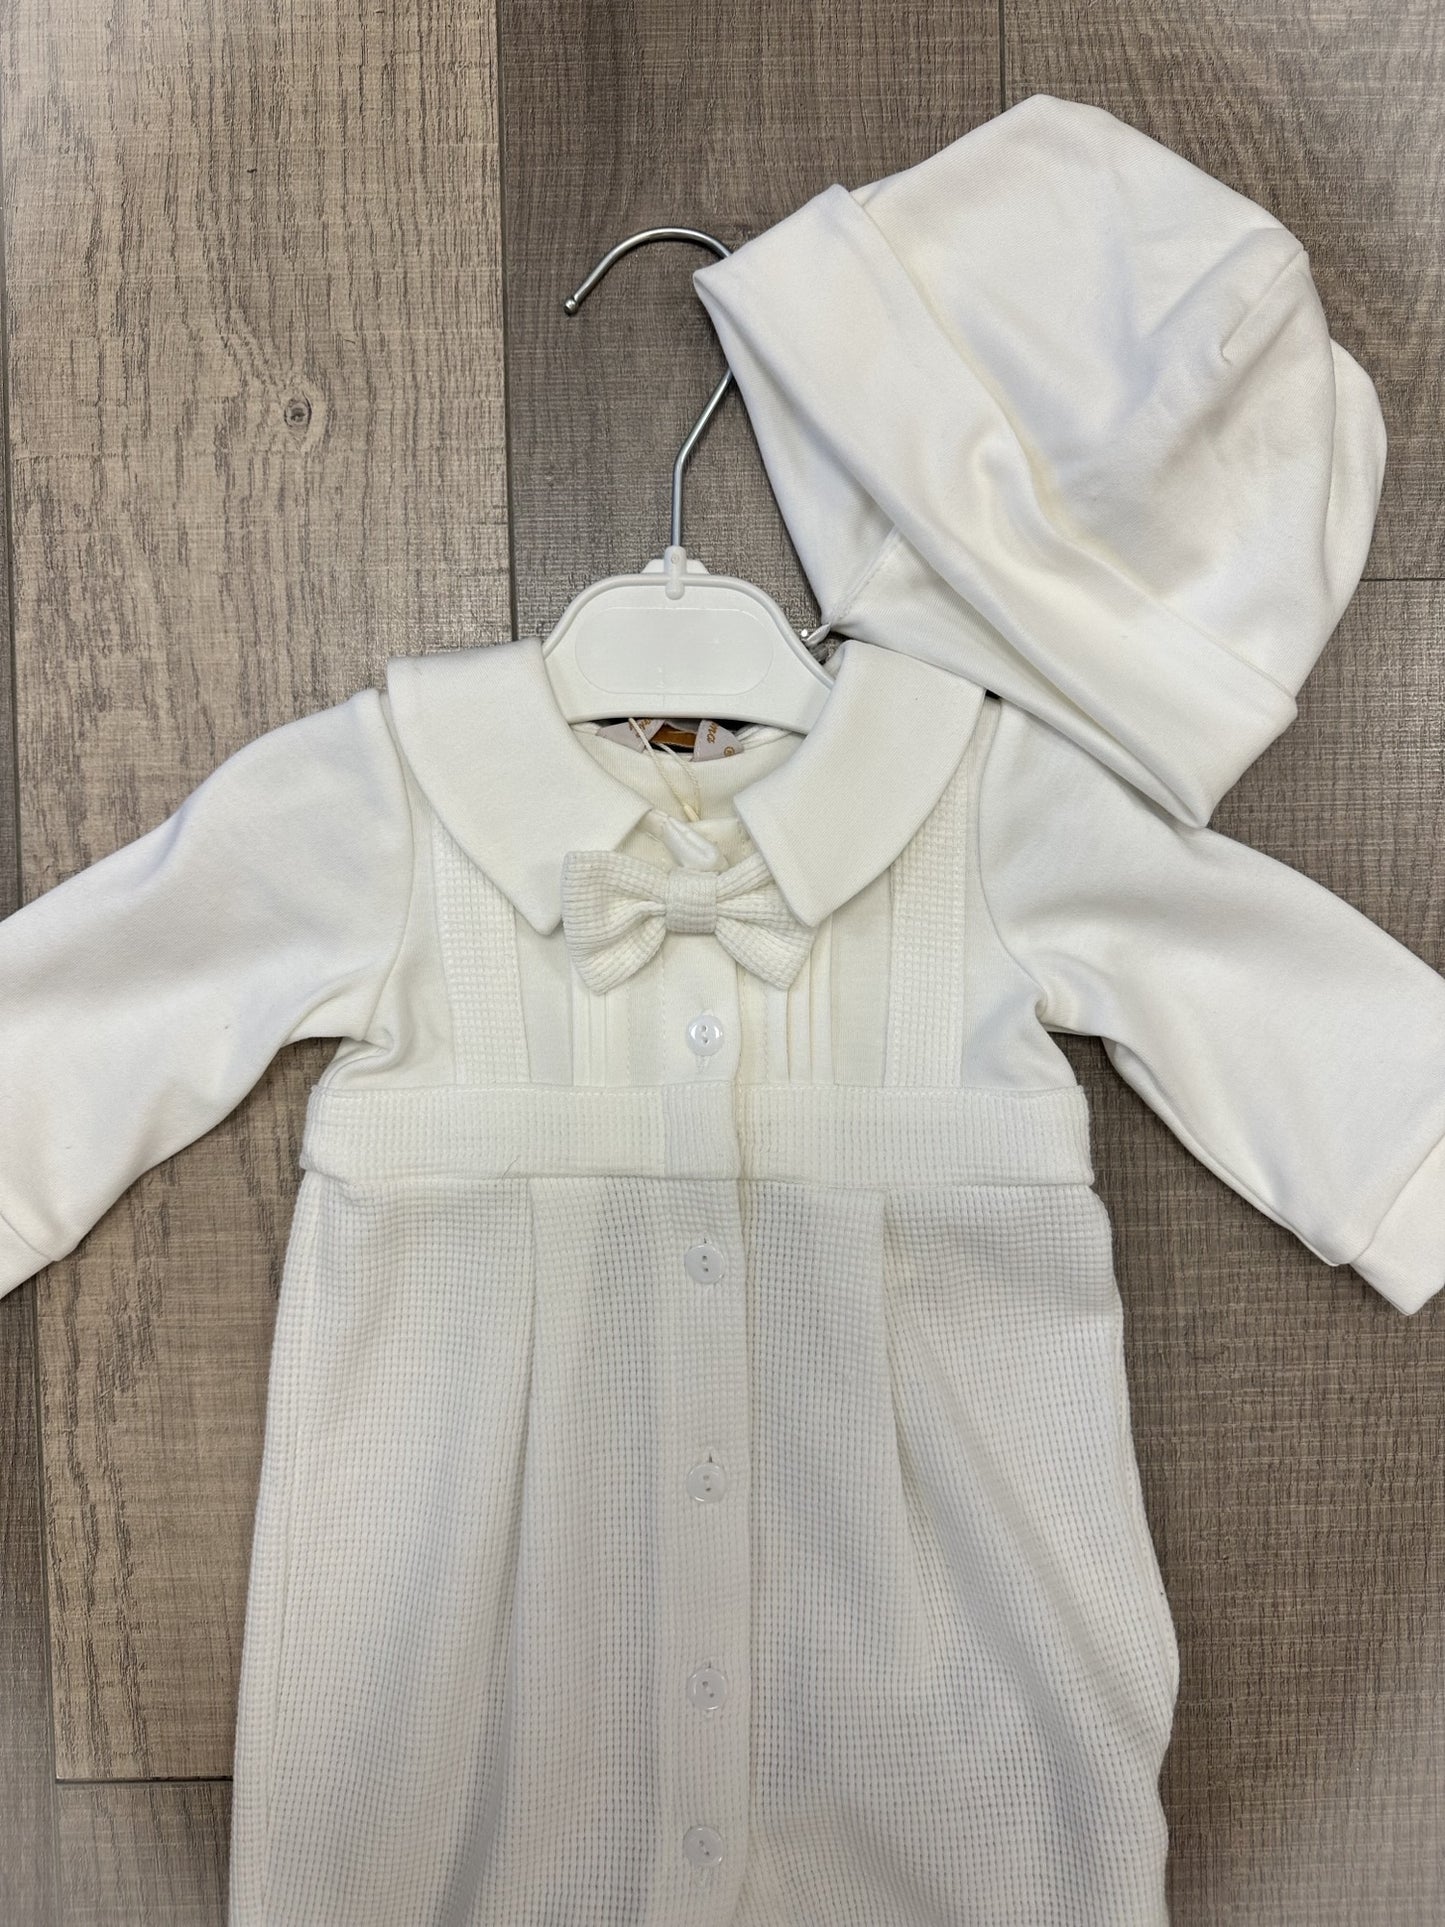 Infant L .Sleeve Onesie with Bow Tie